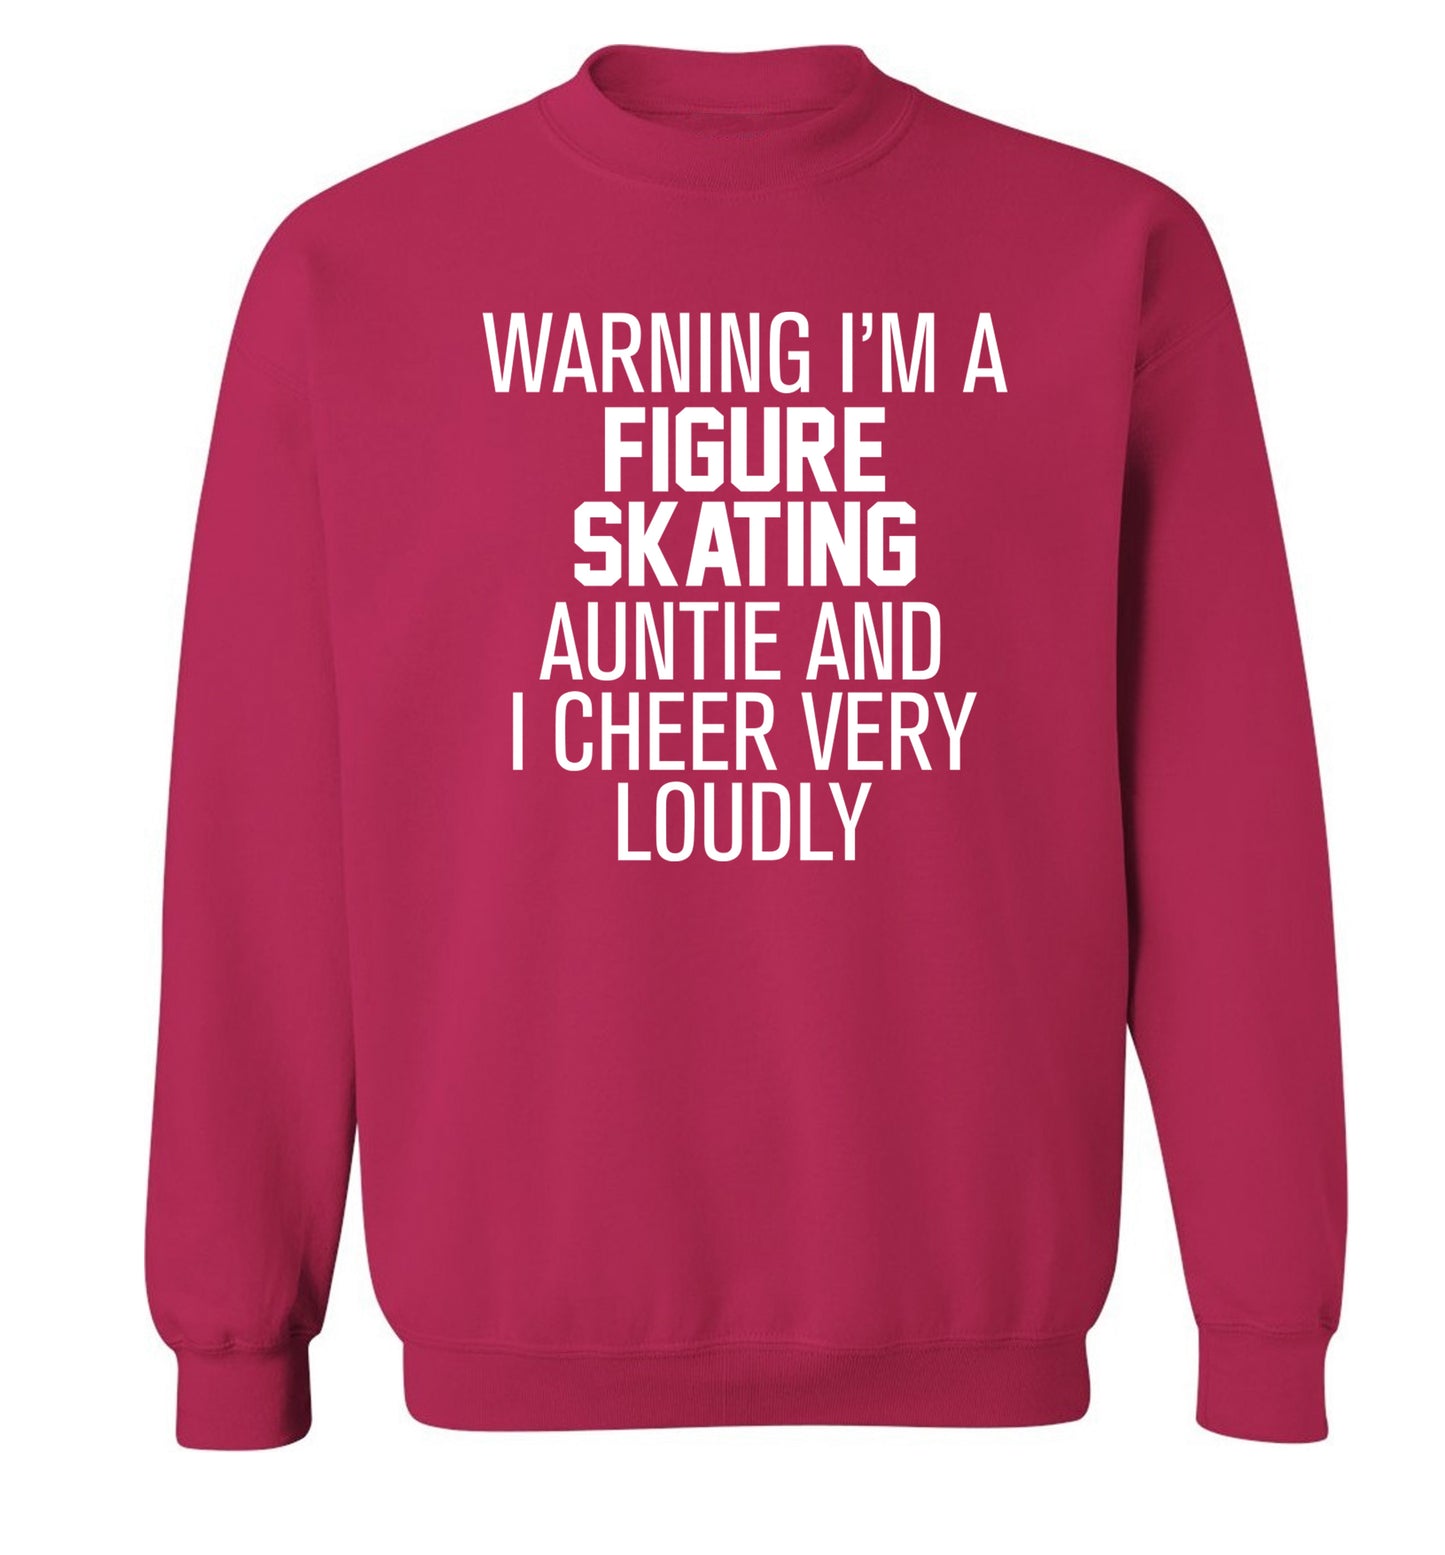 Warning I'm a figure skating auntie and I cheer very loudly Adult's unisexpink Sweater 2XL